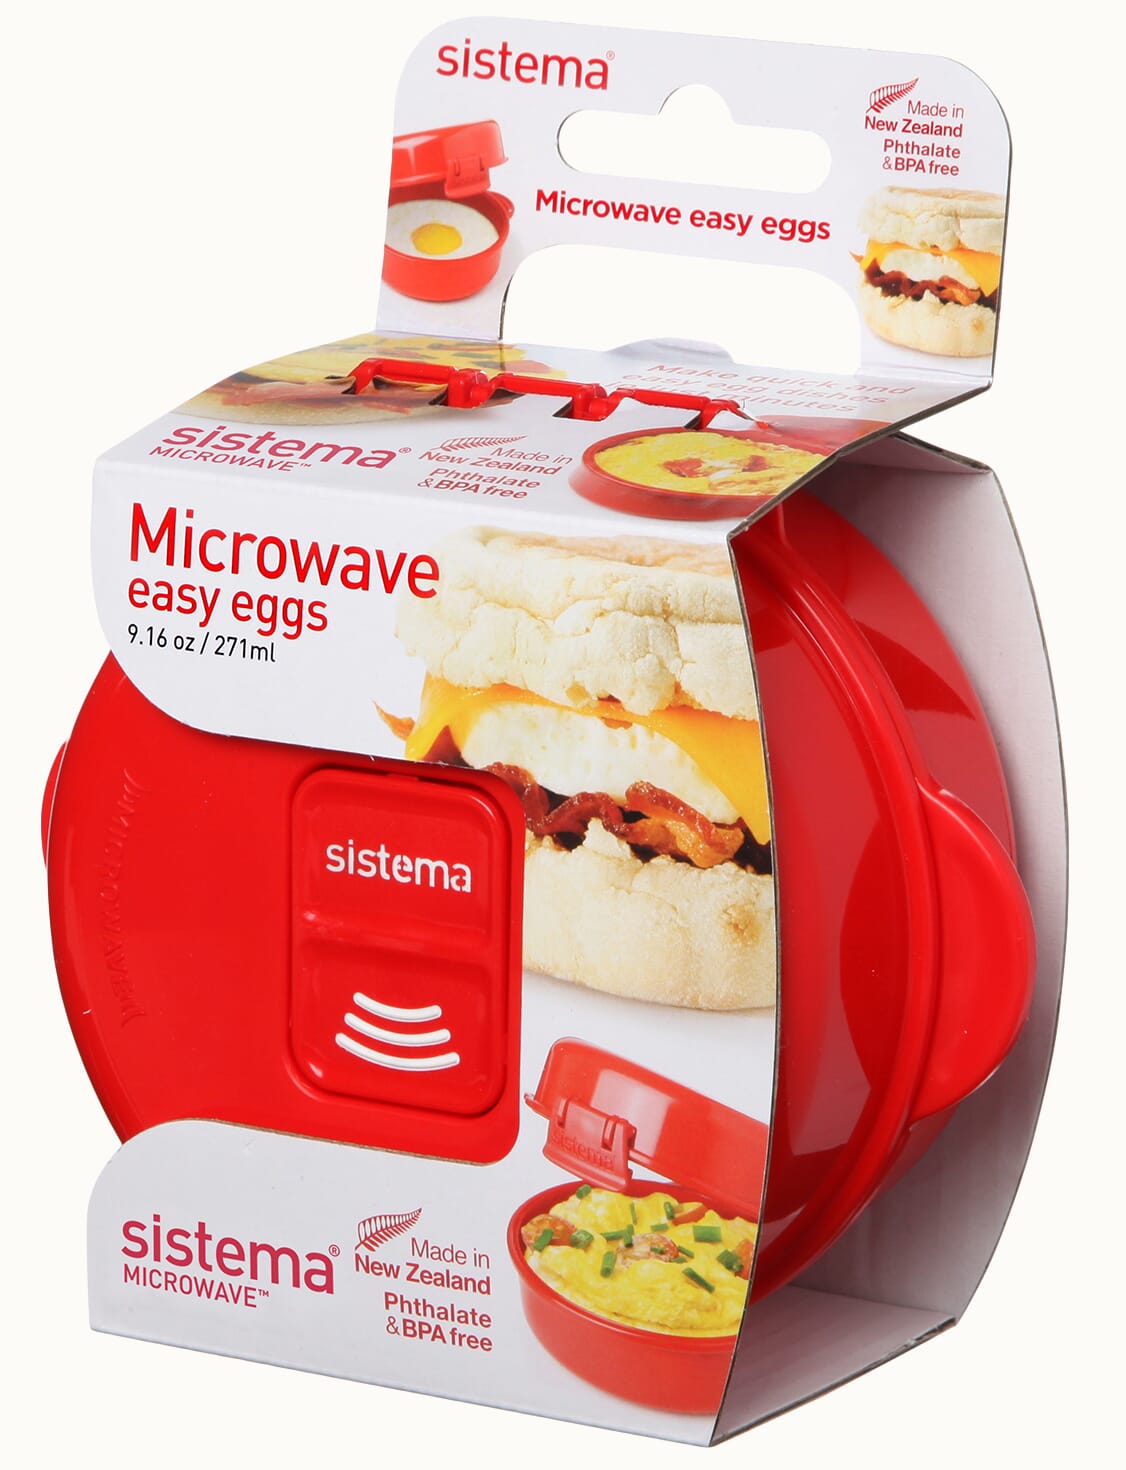 https://stergita.sirv.com/sistema/catalog/product/1/1/1117_easyeggs_microwave_vent_wrap.png?canvas.color=fcfbf8